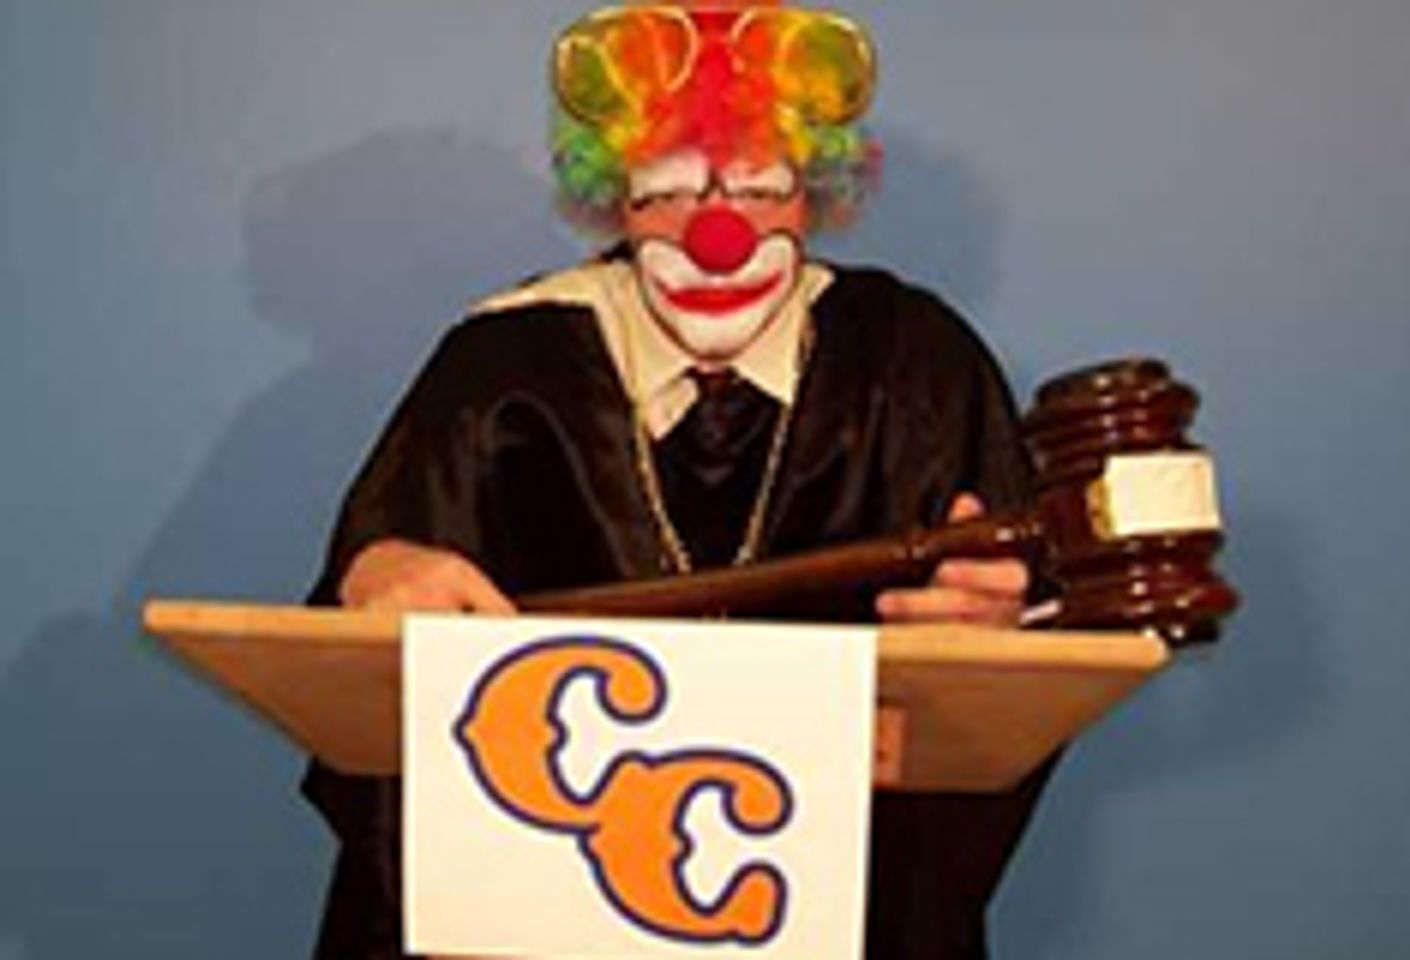 Chibbles the Clown Putting in Bid for Presidency